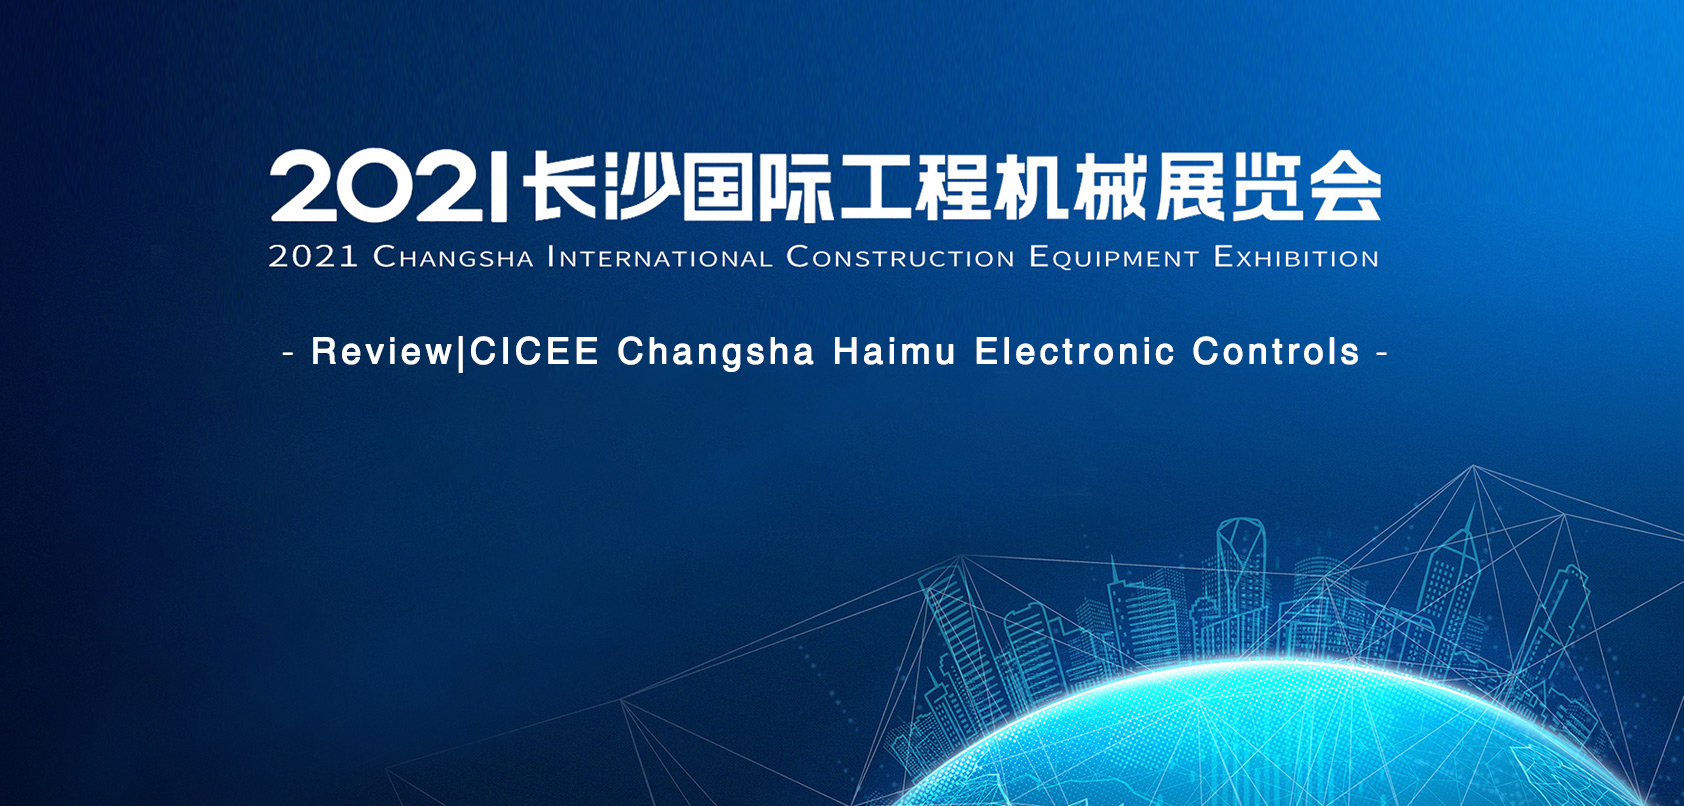 Review|Haimu Electronic Booth in CICEE Changsha